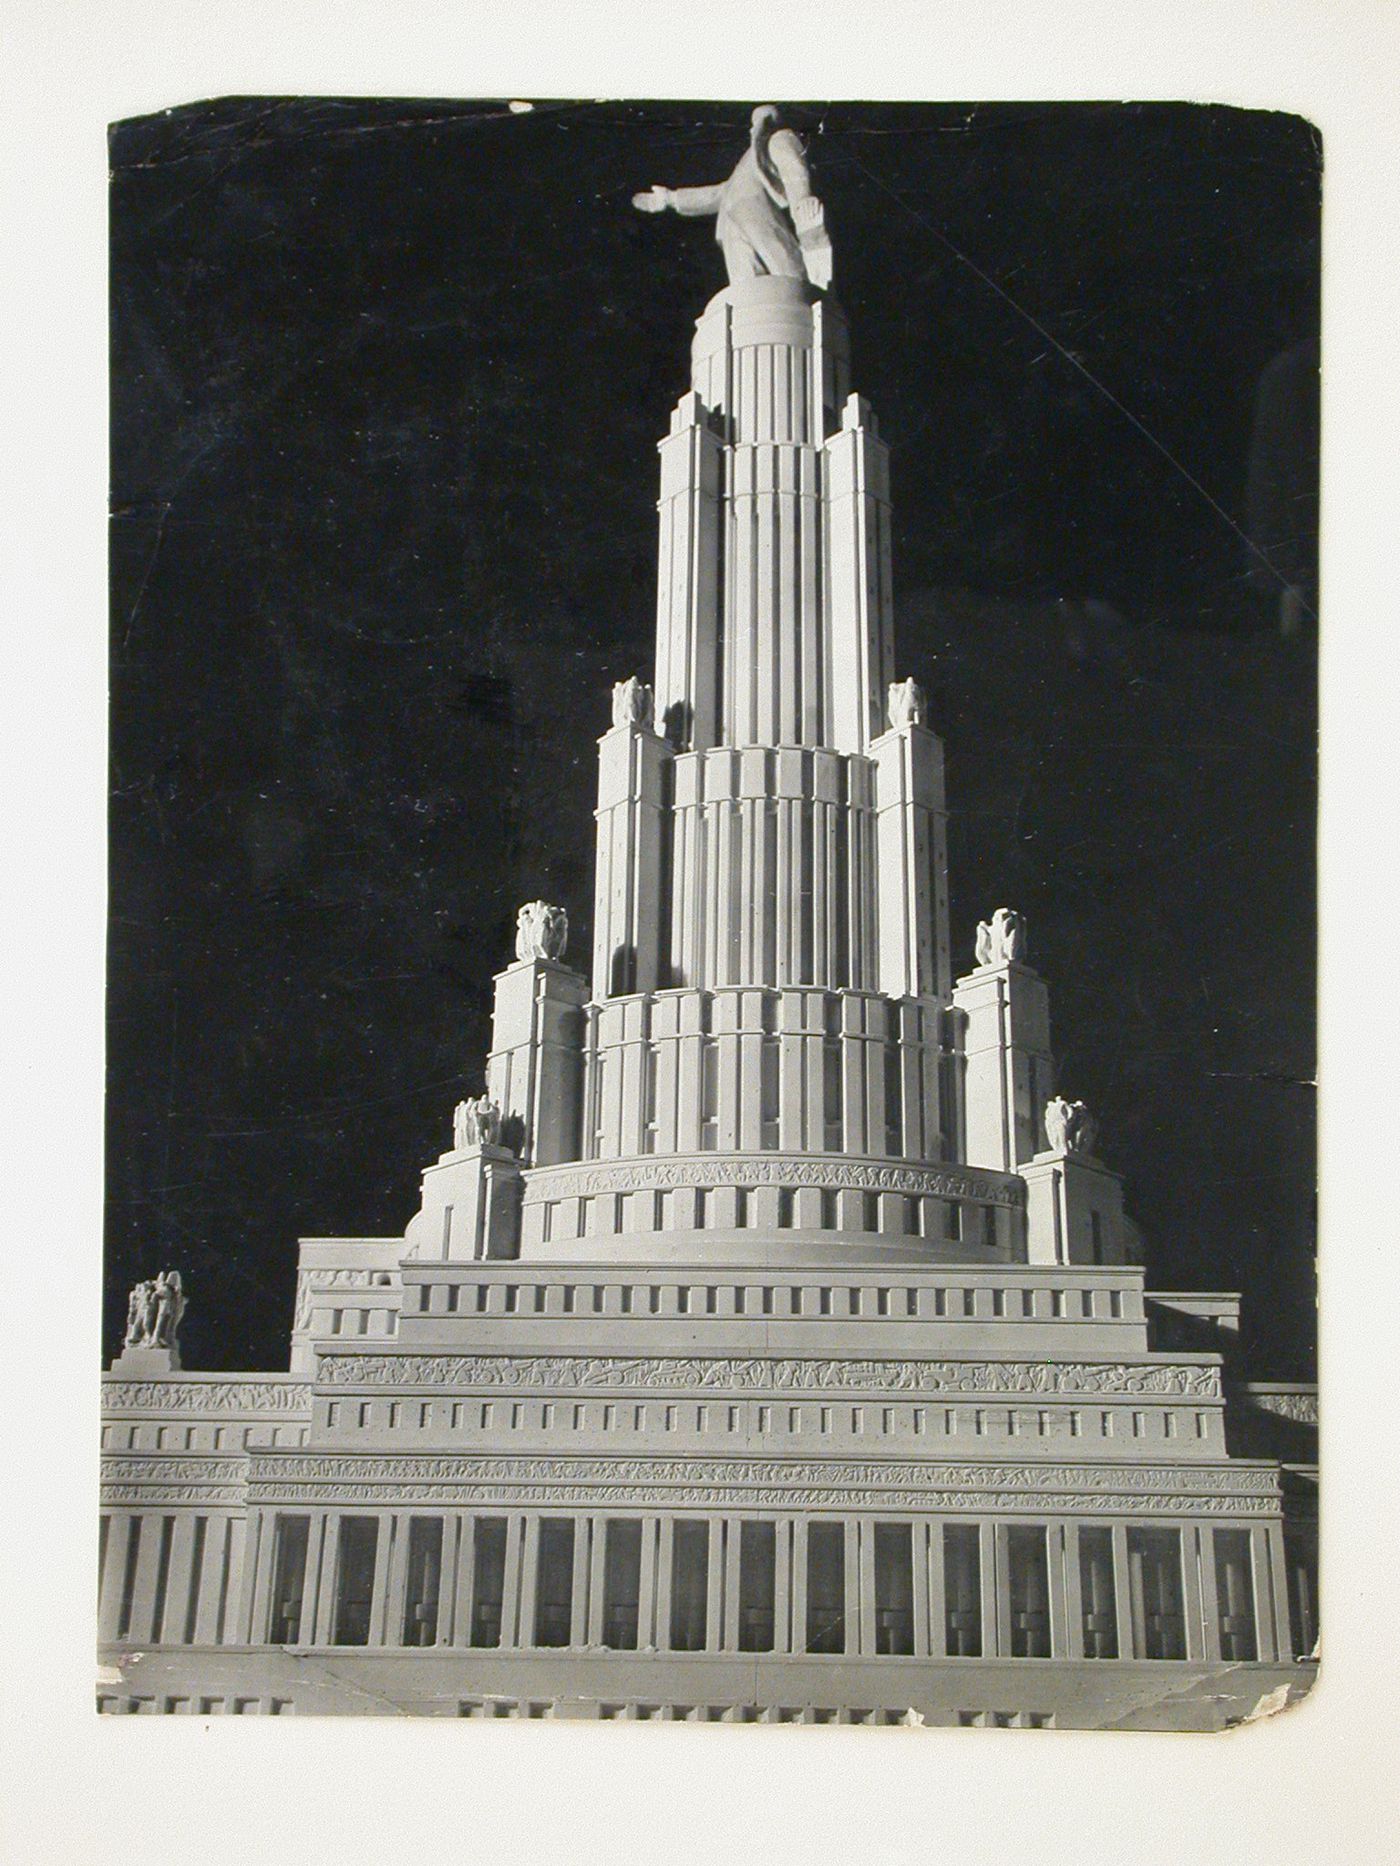 Photograph of a model for the Palace of Soviets, Moscow